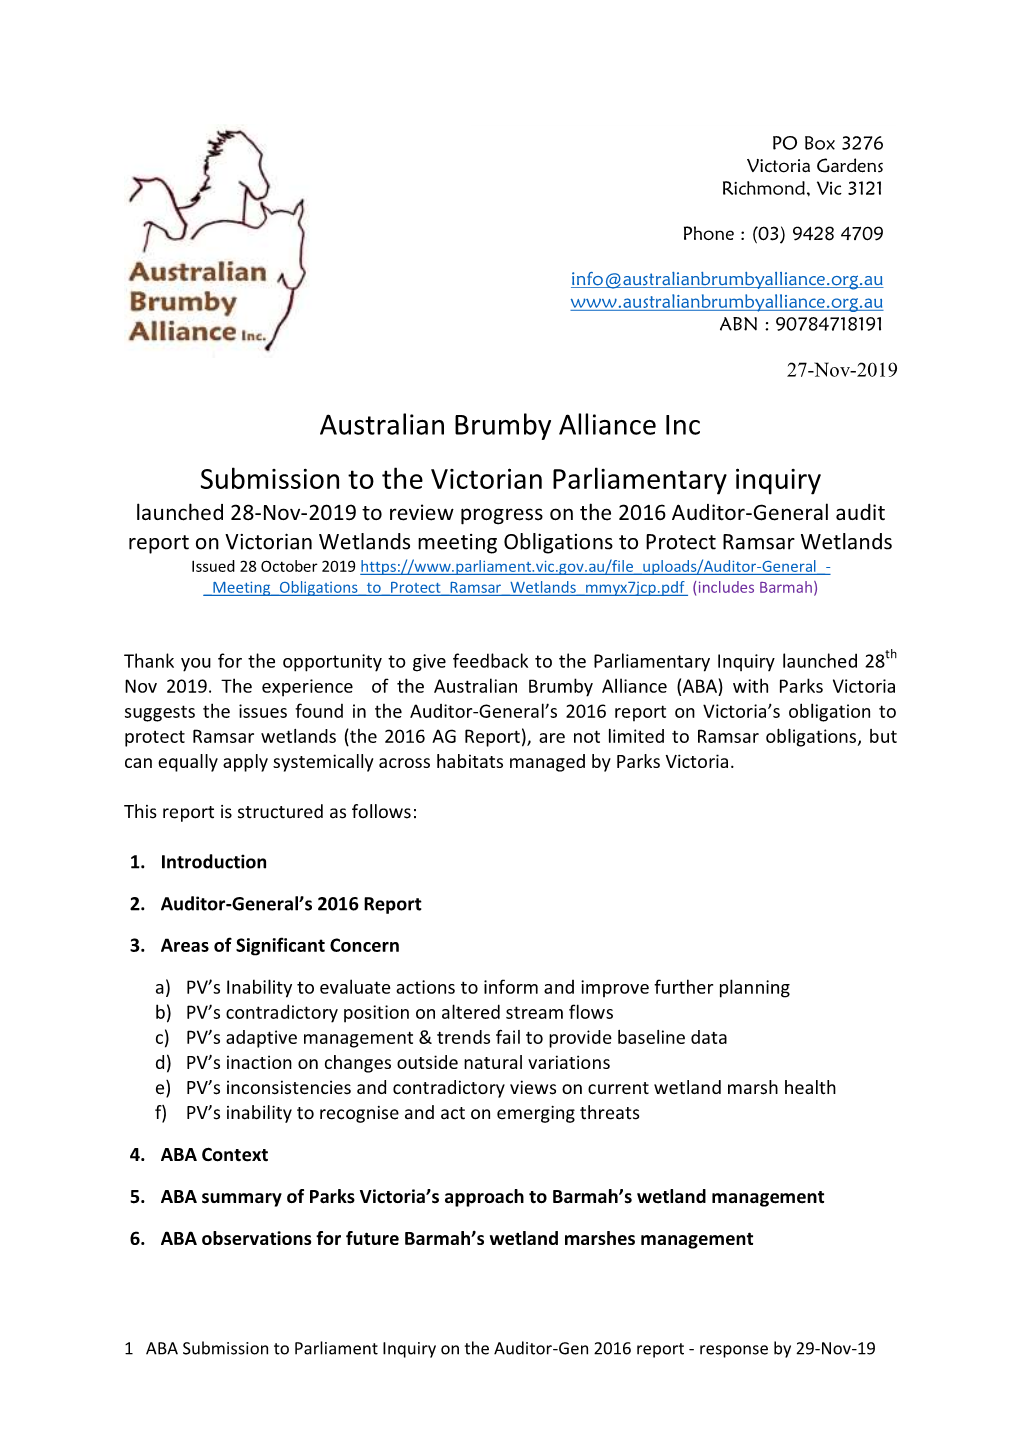 Australian Brumby Alliance Inc Submission to the Victorian